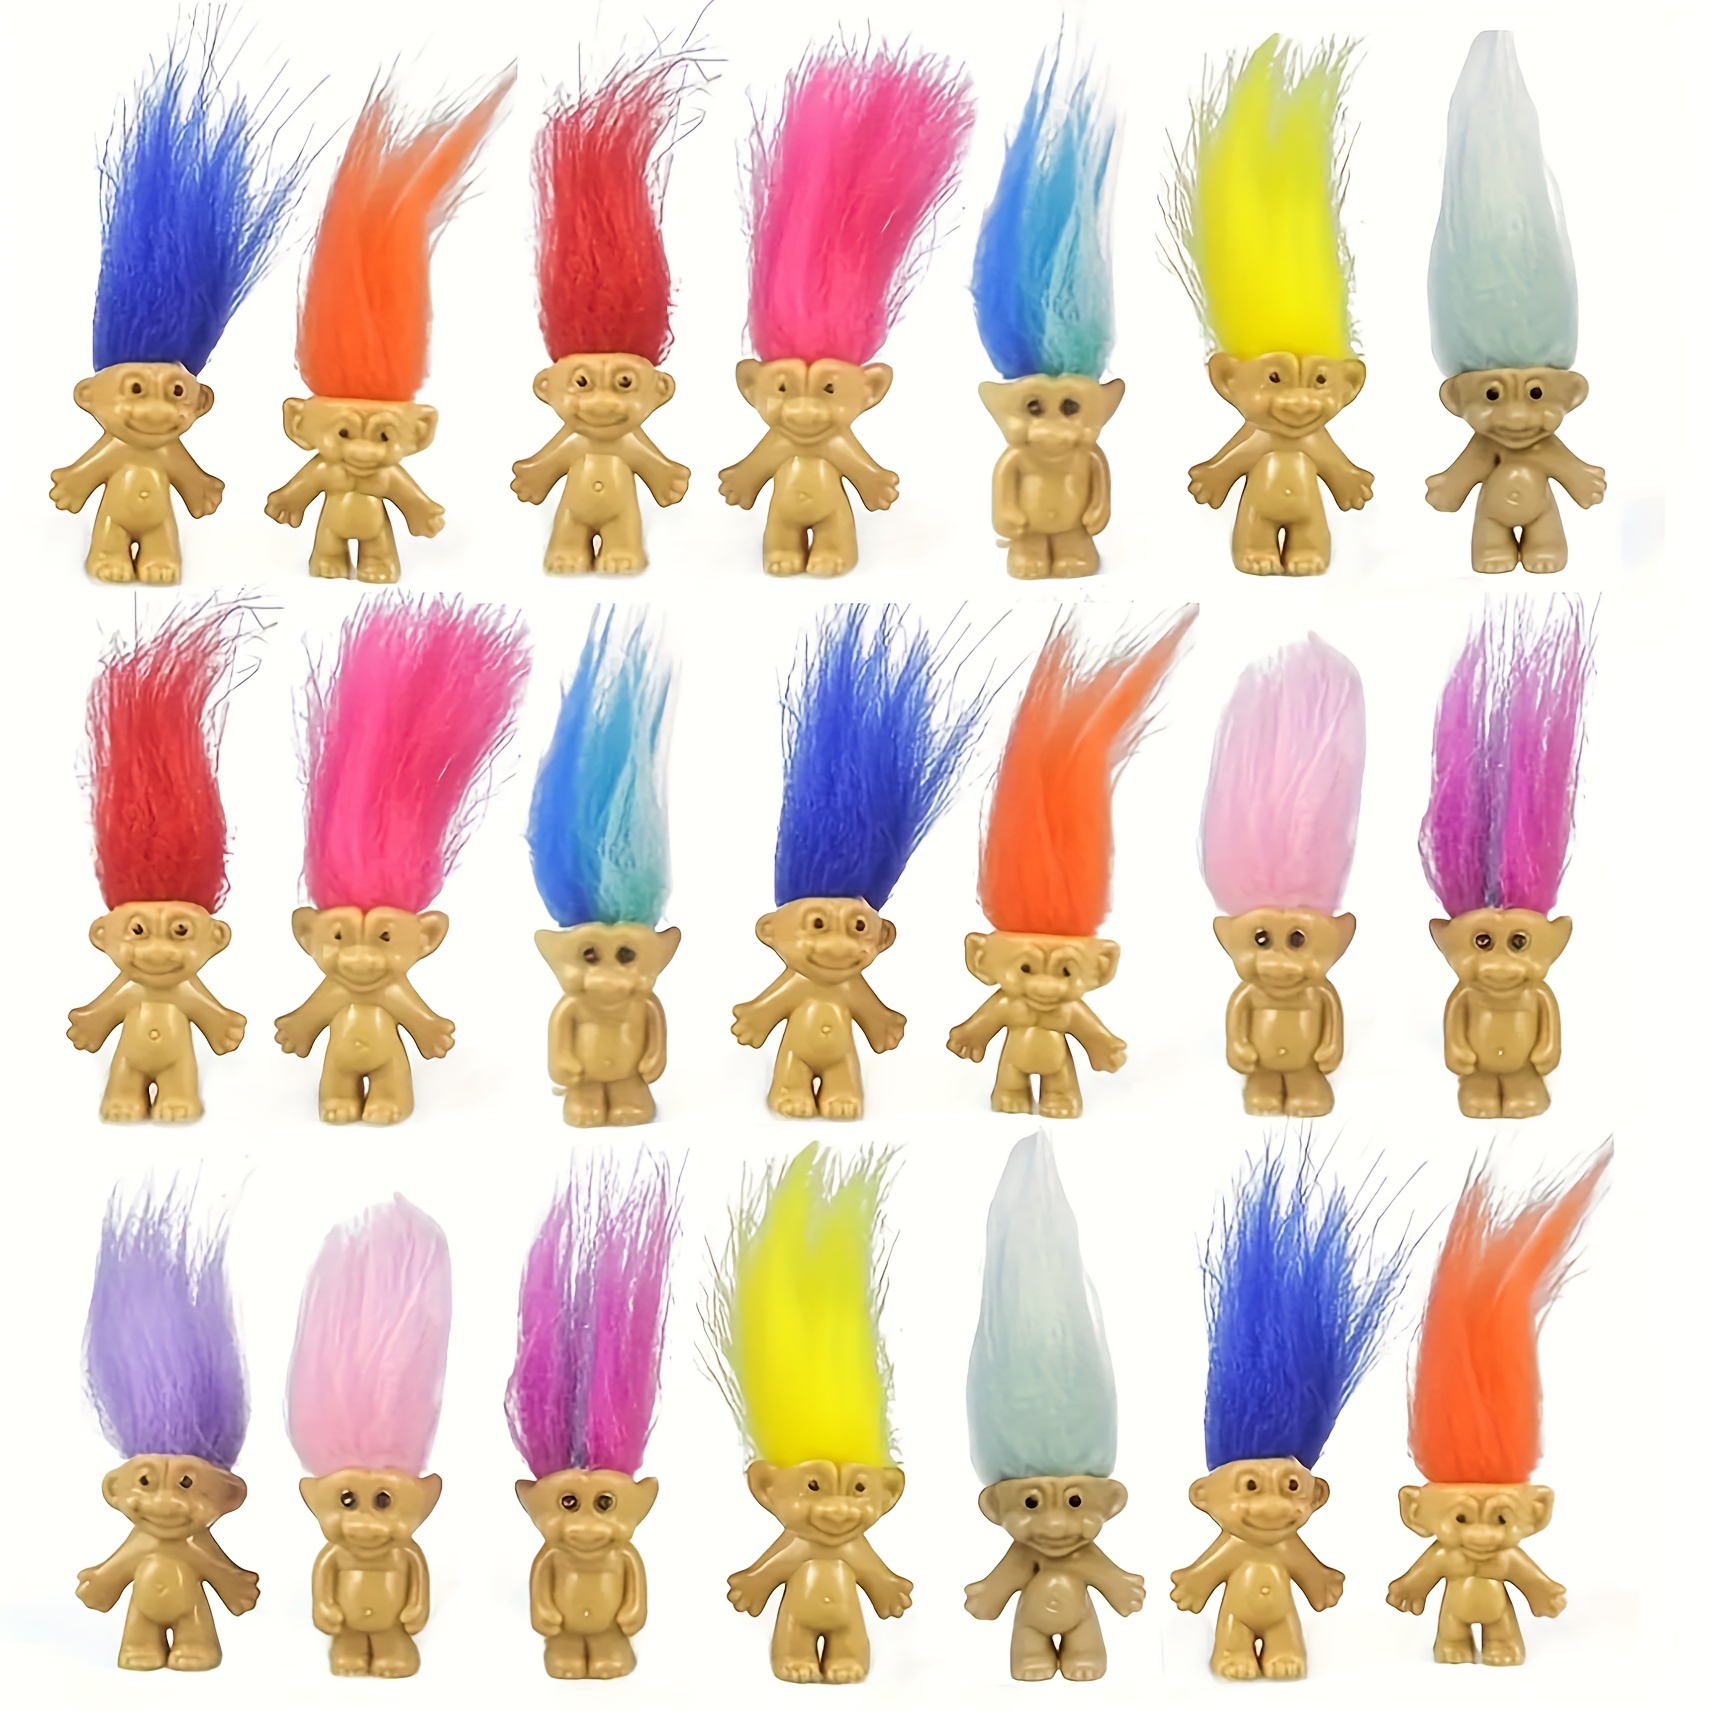 

Adorable Mini Troll Dolls - 10/20/30 Piece | Vintage Pvc Lucky Charms | Colorful Cake Topper Figurines | Perfect For Arts & Crafts, School Projects & Party Favors